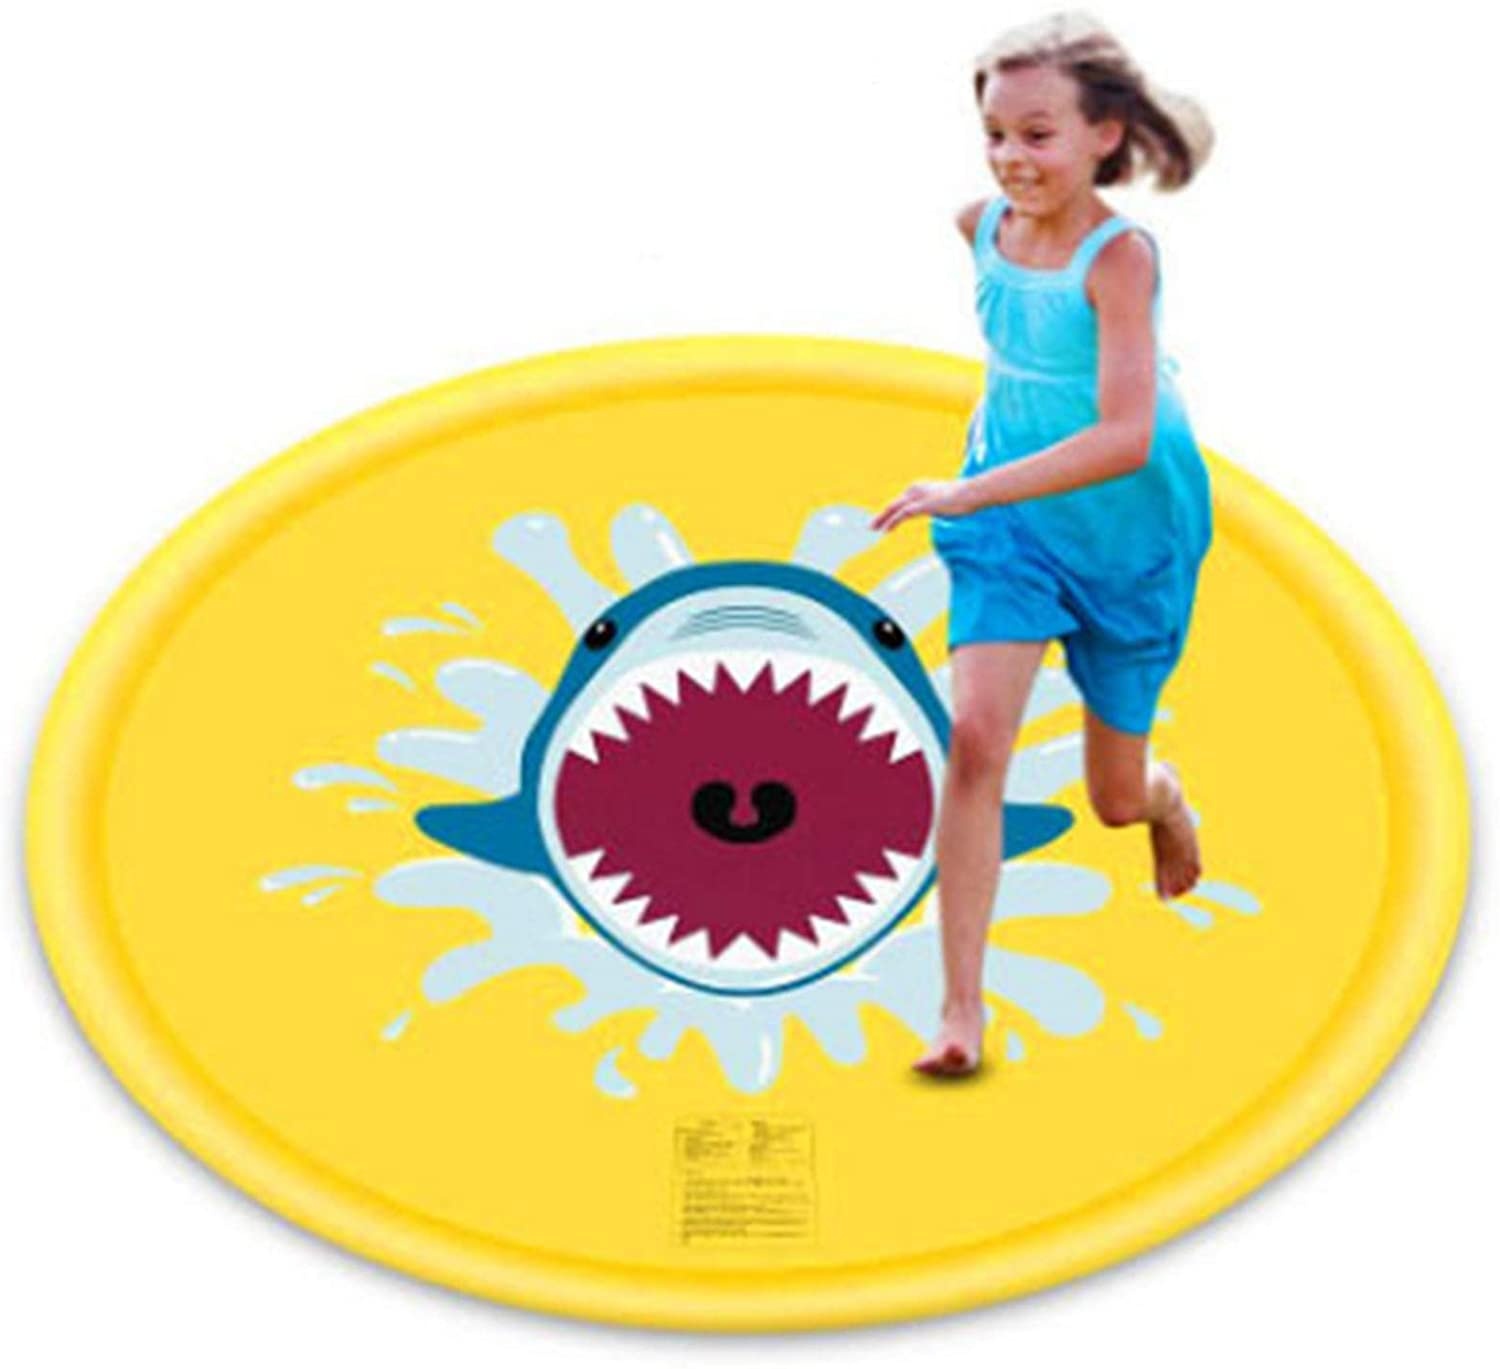 68 Inches Portable Inflatable Water Sprinkler Pad Splash Pad Sprinkler Mat Sprinkle and Splash Play Mat for baby water playing